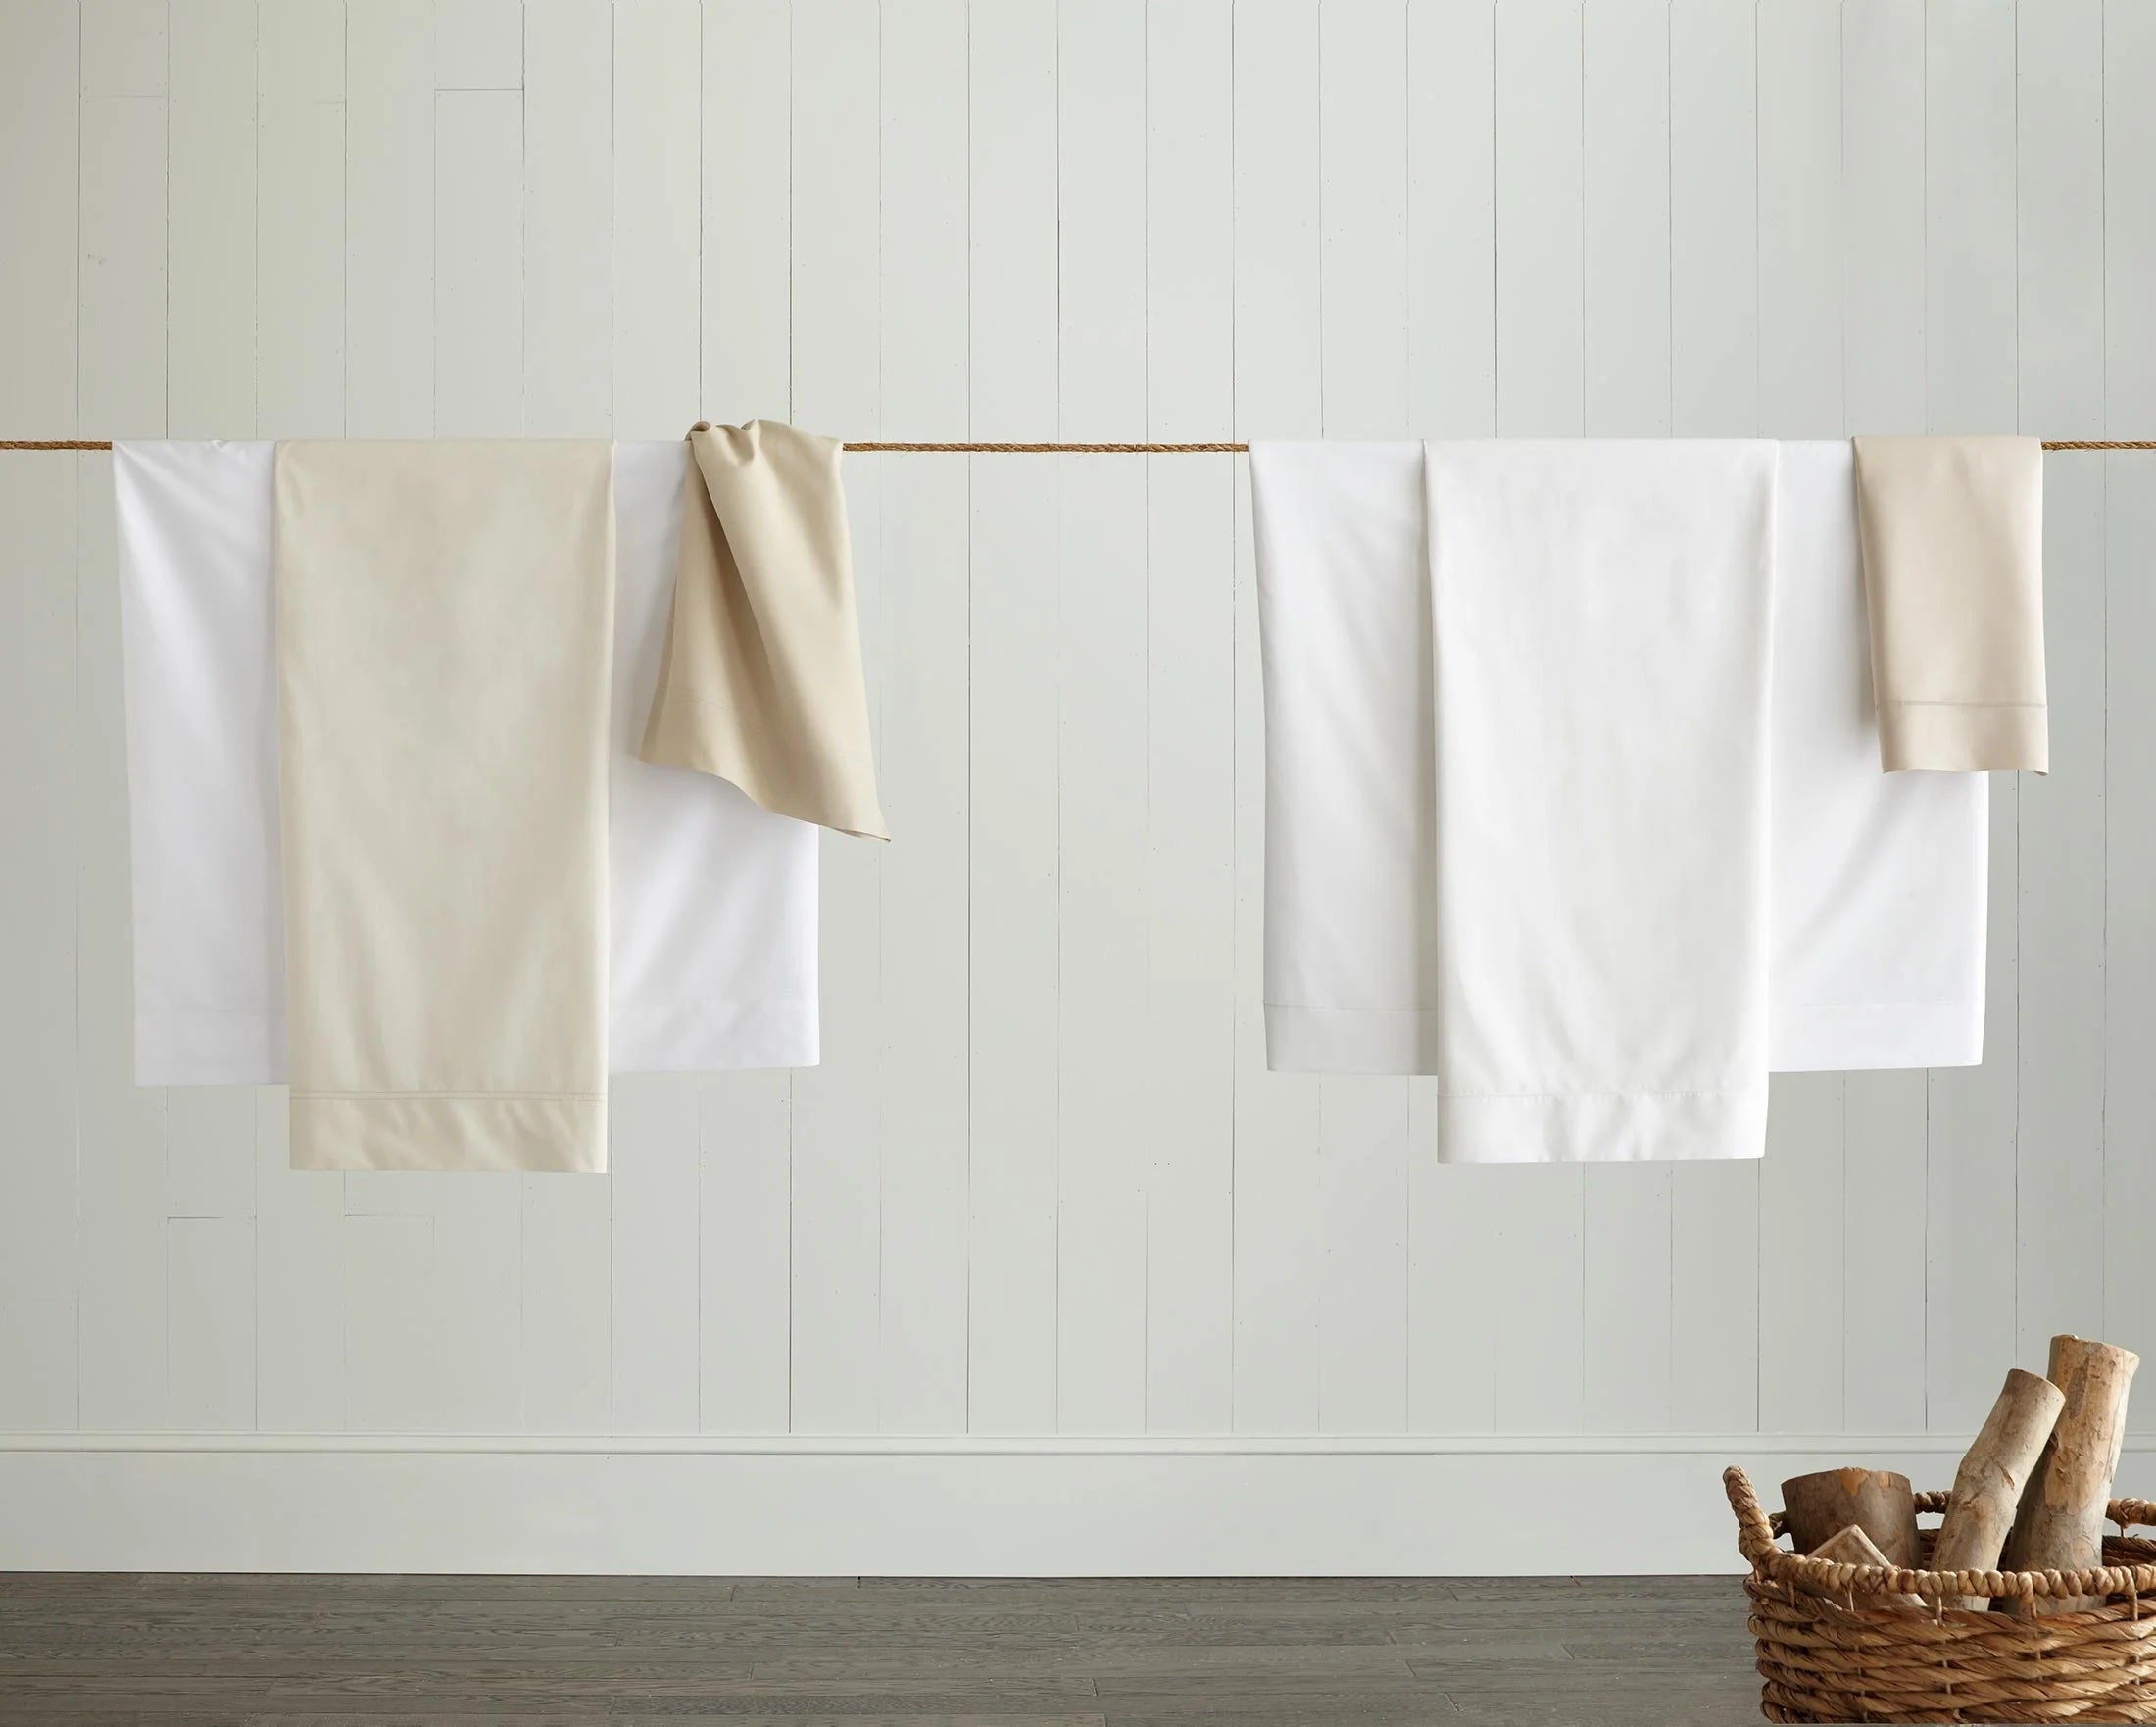 Can You Wash Sheets and Towels Together?